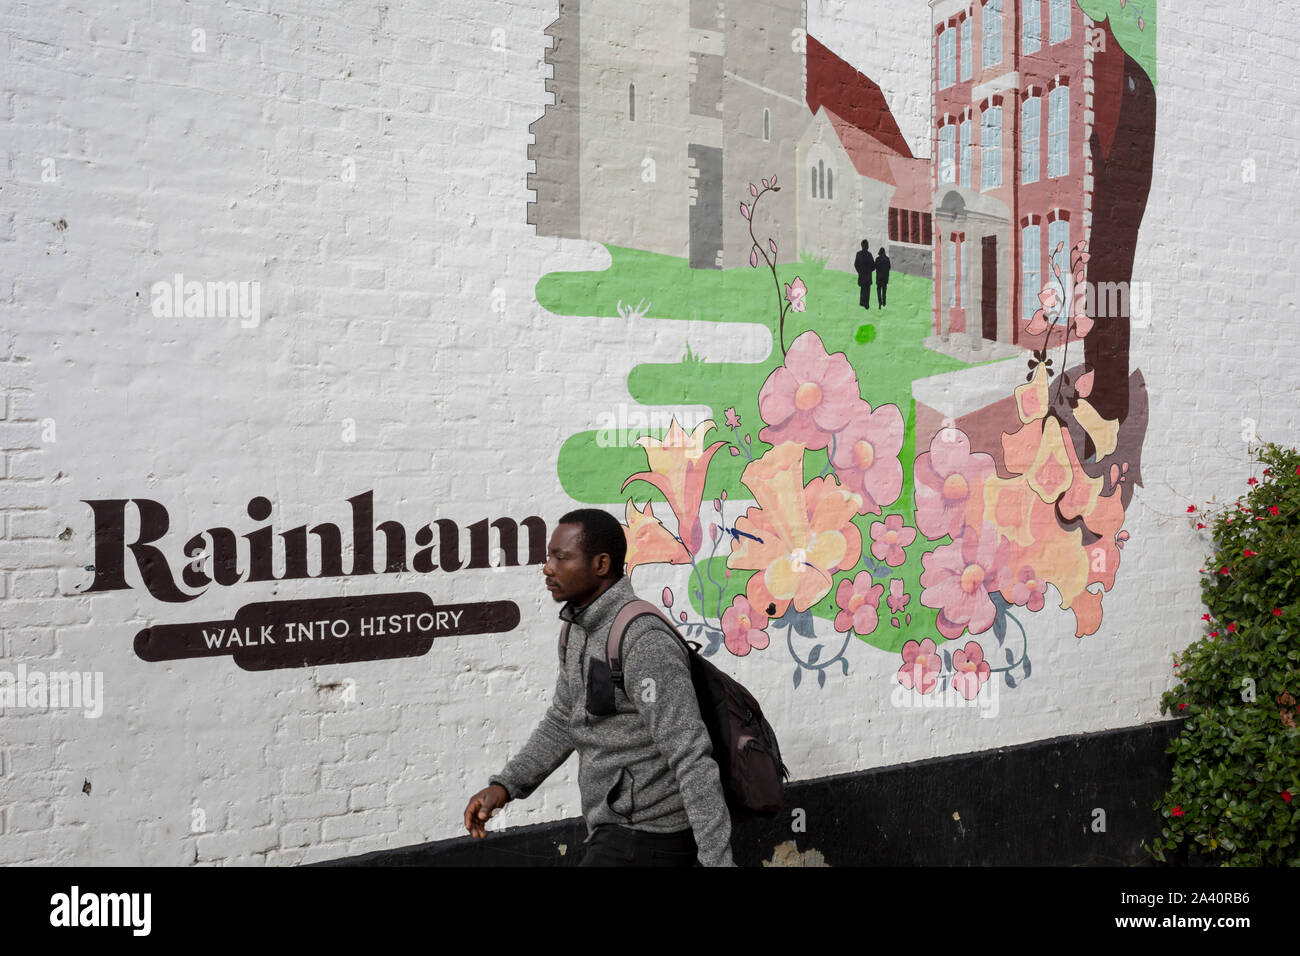 A local man walks past an artwork mural showing the small Essex town of Rainham, on 8th October 2019, in Rainham, Essex, England. Voters in this Havering borough voted 69% in favour of Brexit during the 2016 referendum. Stock Photo